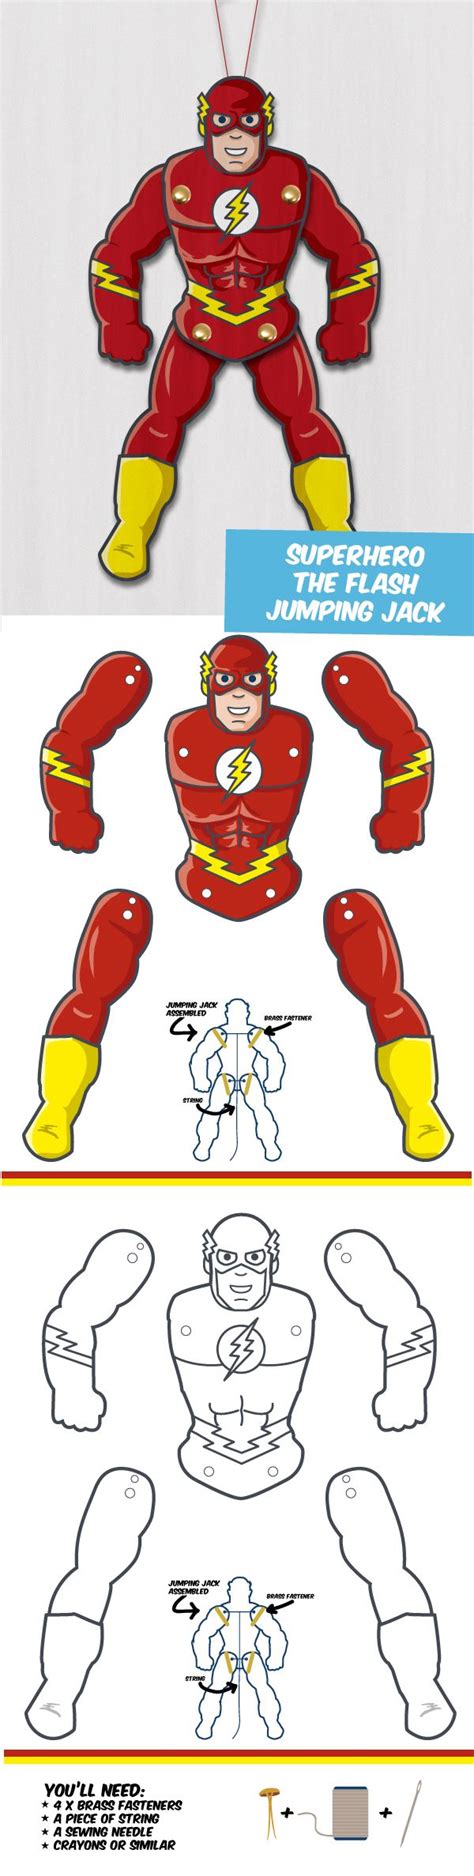 Customize your hero costume, gadgets and. The Flash goes Jumping Jack | Hampelmann, Avengers ...